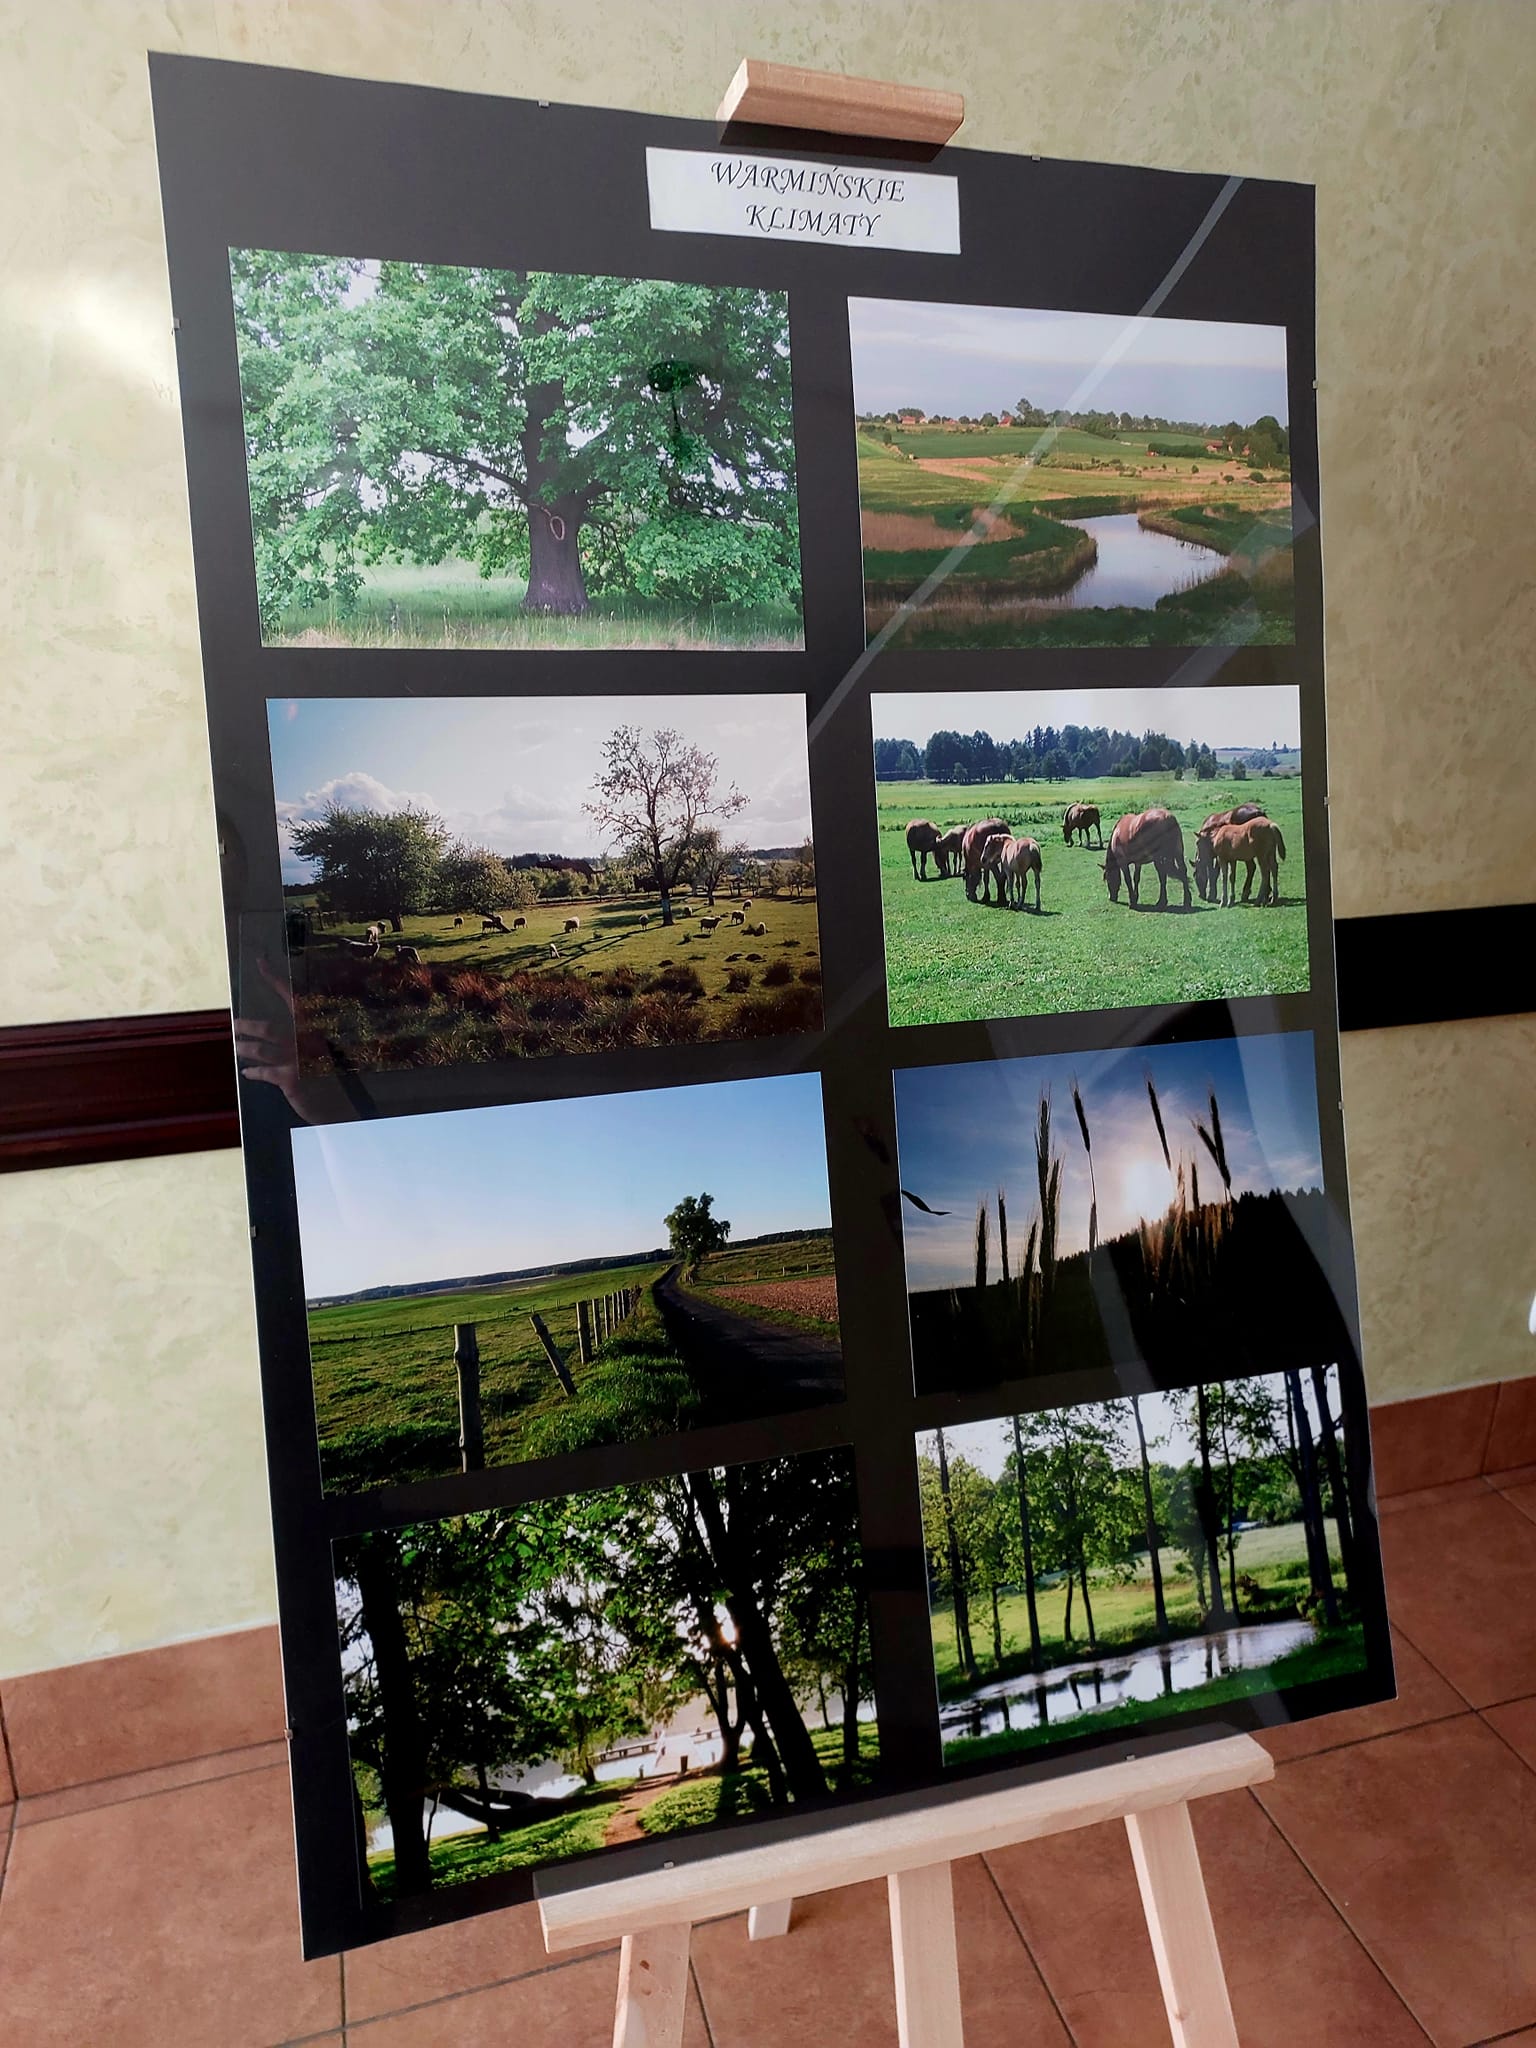 Photos from the series of Warmian climates - water, forest, meadows and pastures.